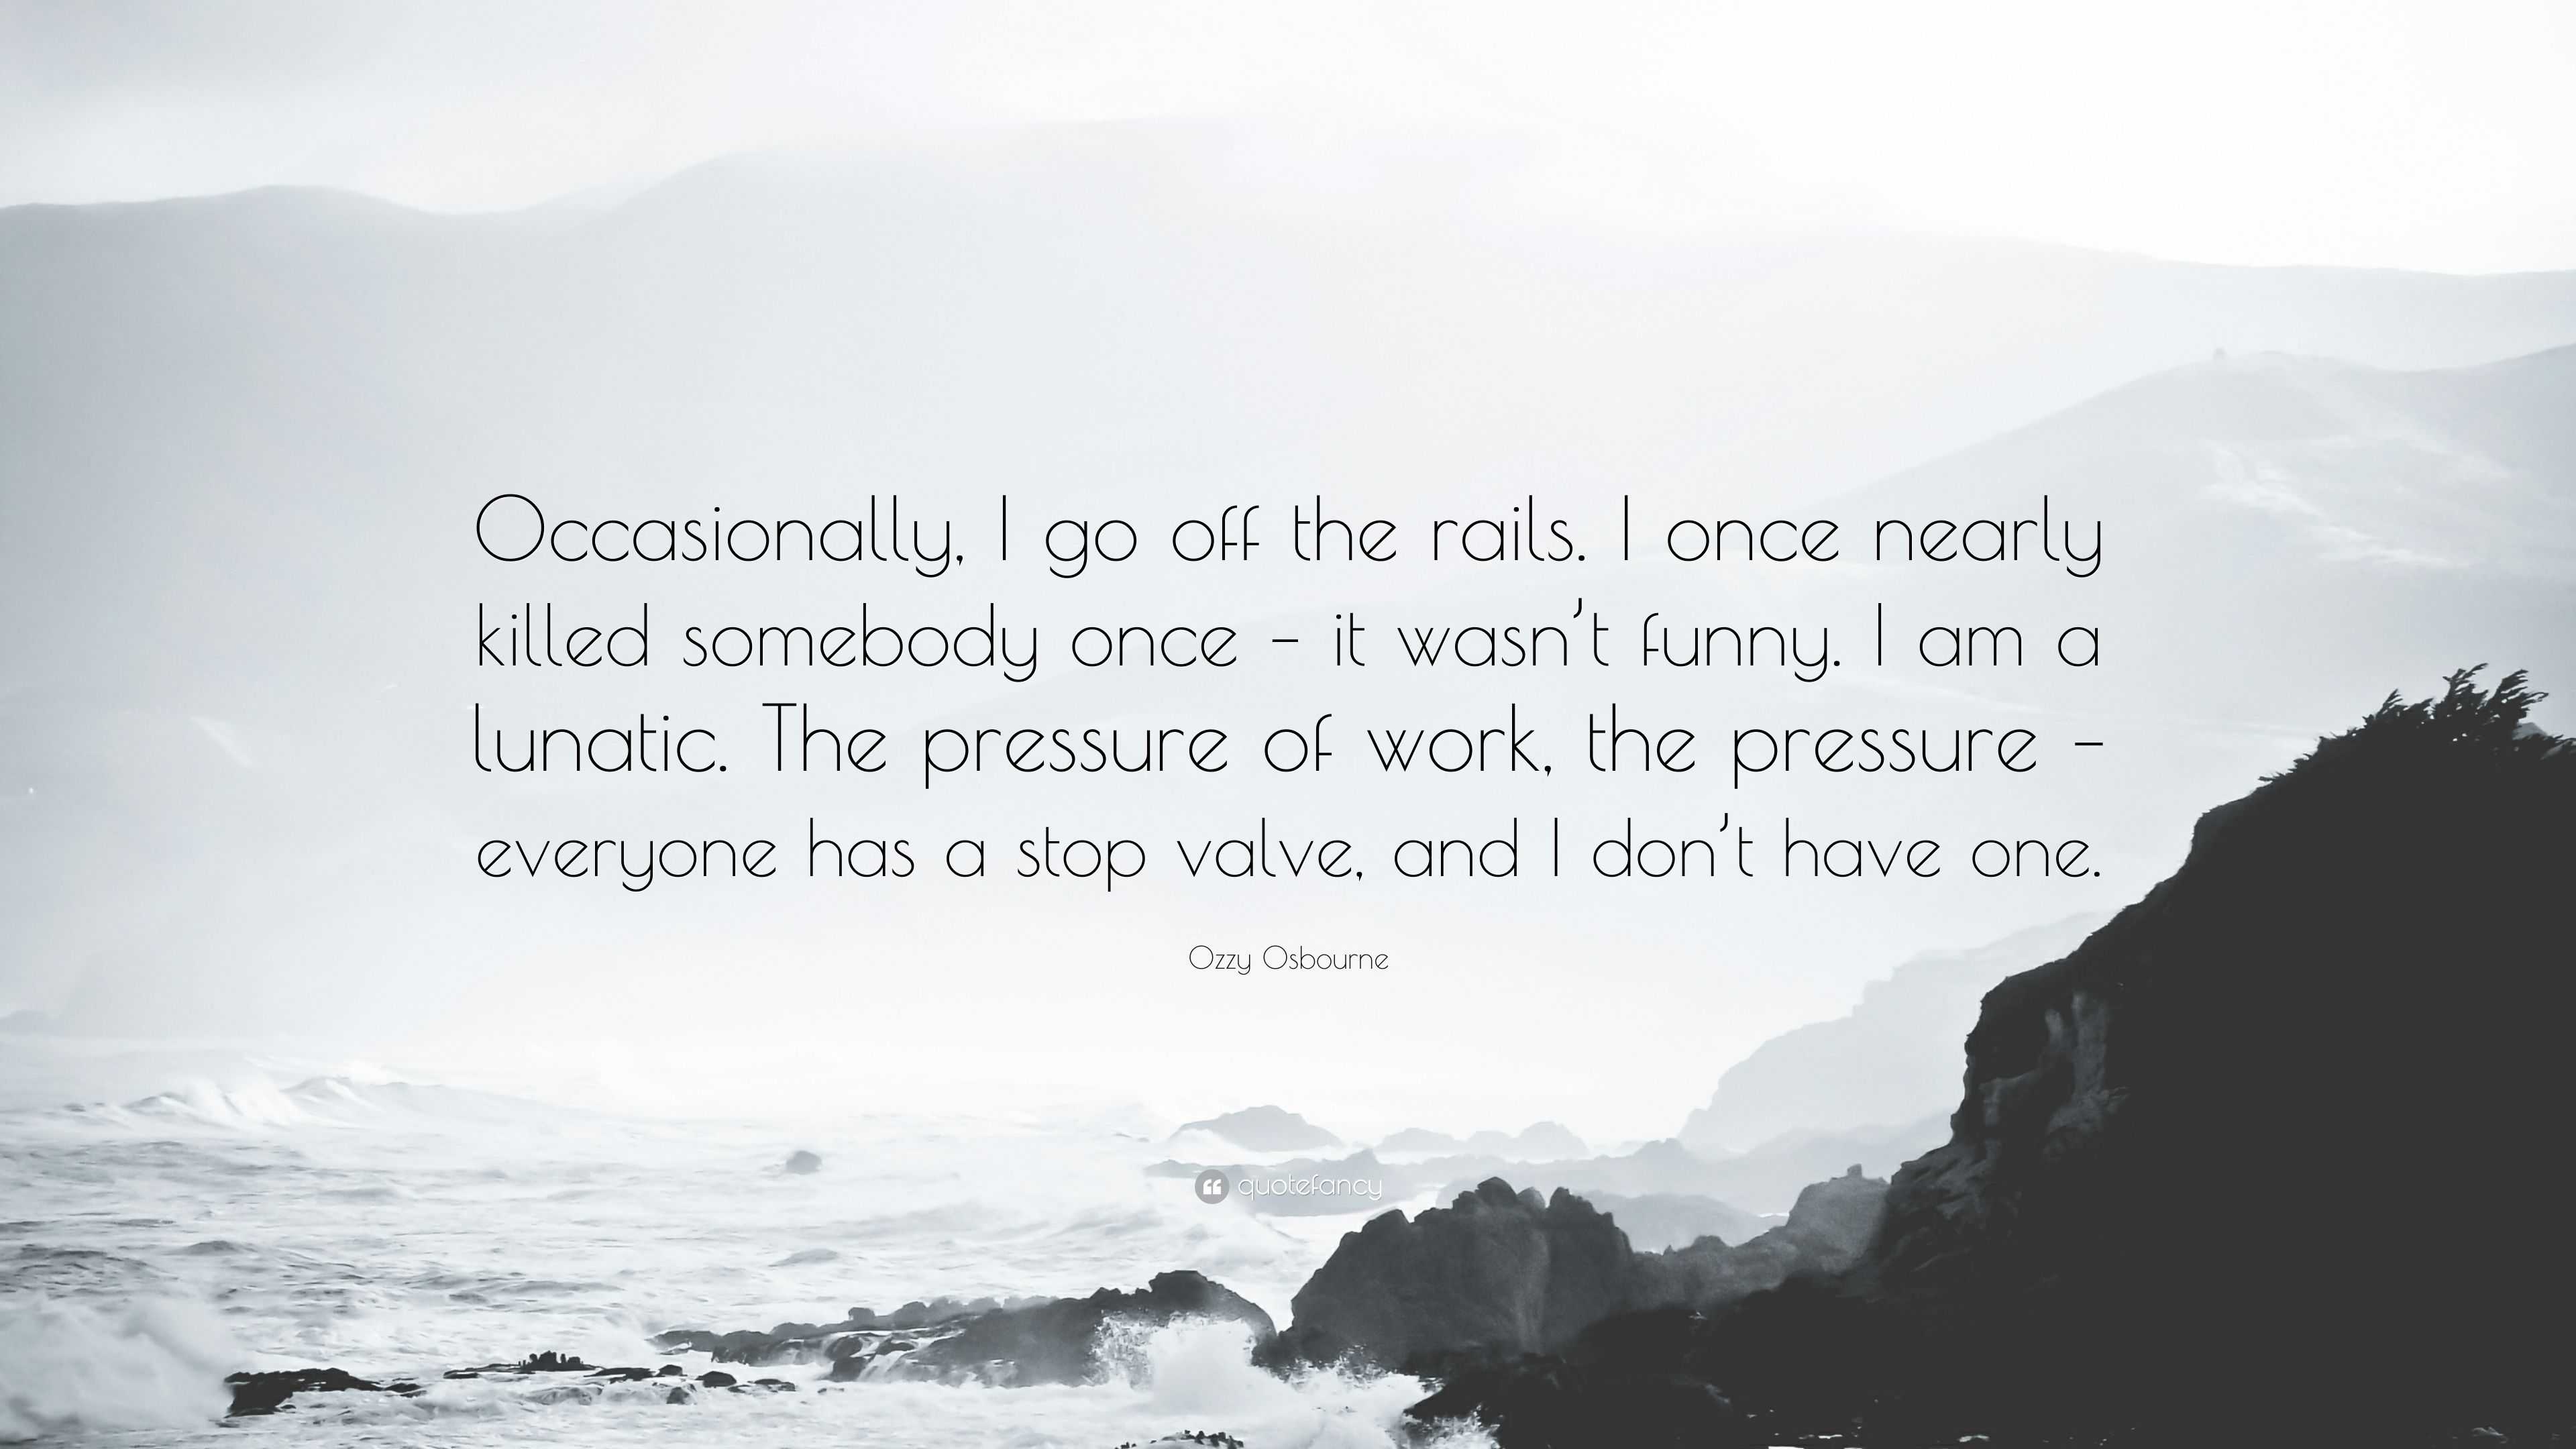 Ozzy Osbourne Quote: “Occasionally, I go off the rails. I once nearly  killed somebody once – it wasn't funny. I am a lunatic. The pressure of ...”